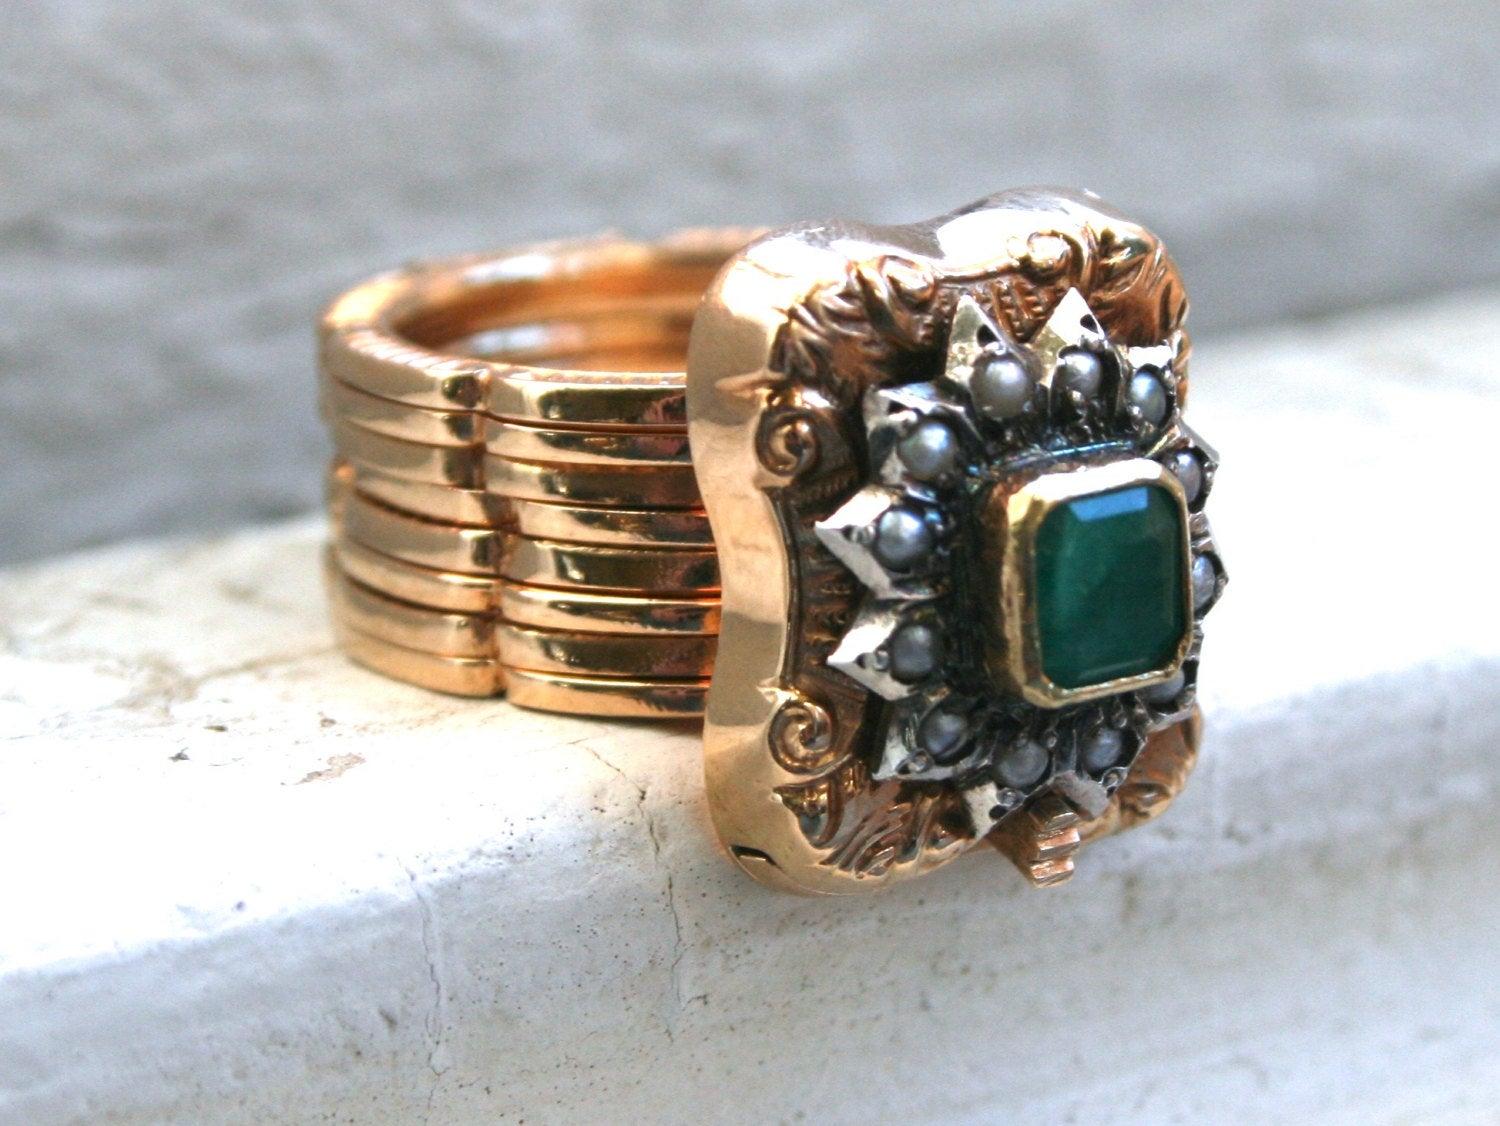 This Unique Vintage Emerald and Pearl Ring/ Bracelet is certainly unexpected. I've never seen another like it, and I know I'll never see another, and is just beautiful! Crafted in 18K Yellow Gold, the design is really a work of art and